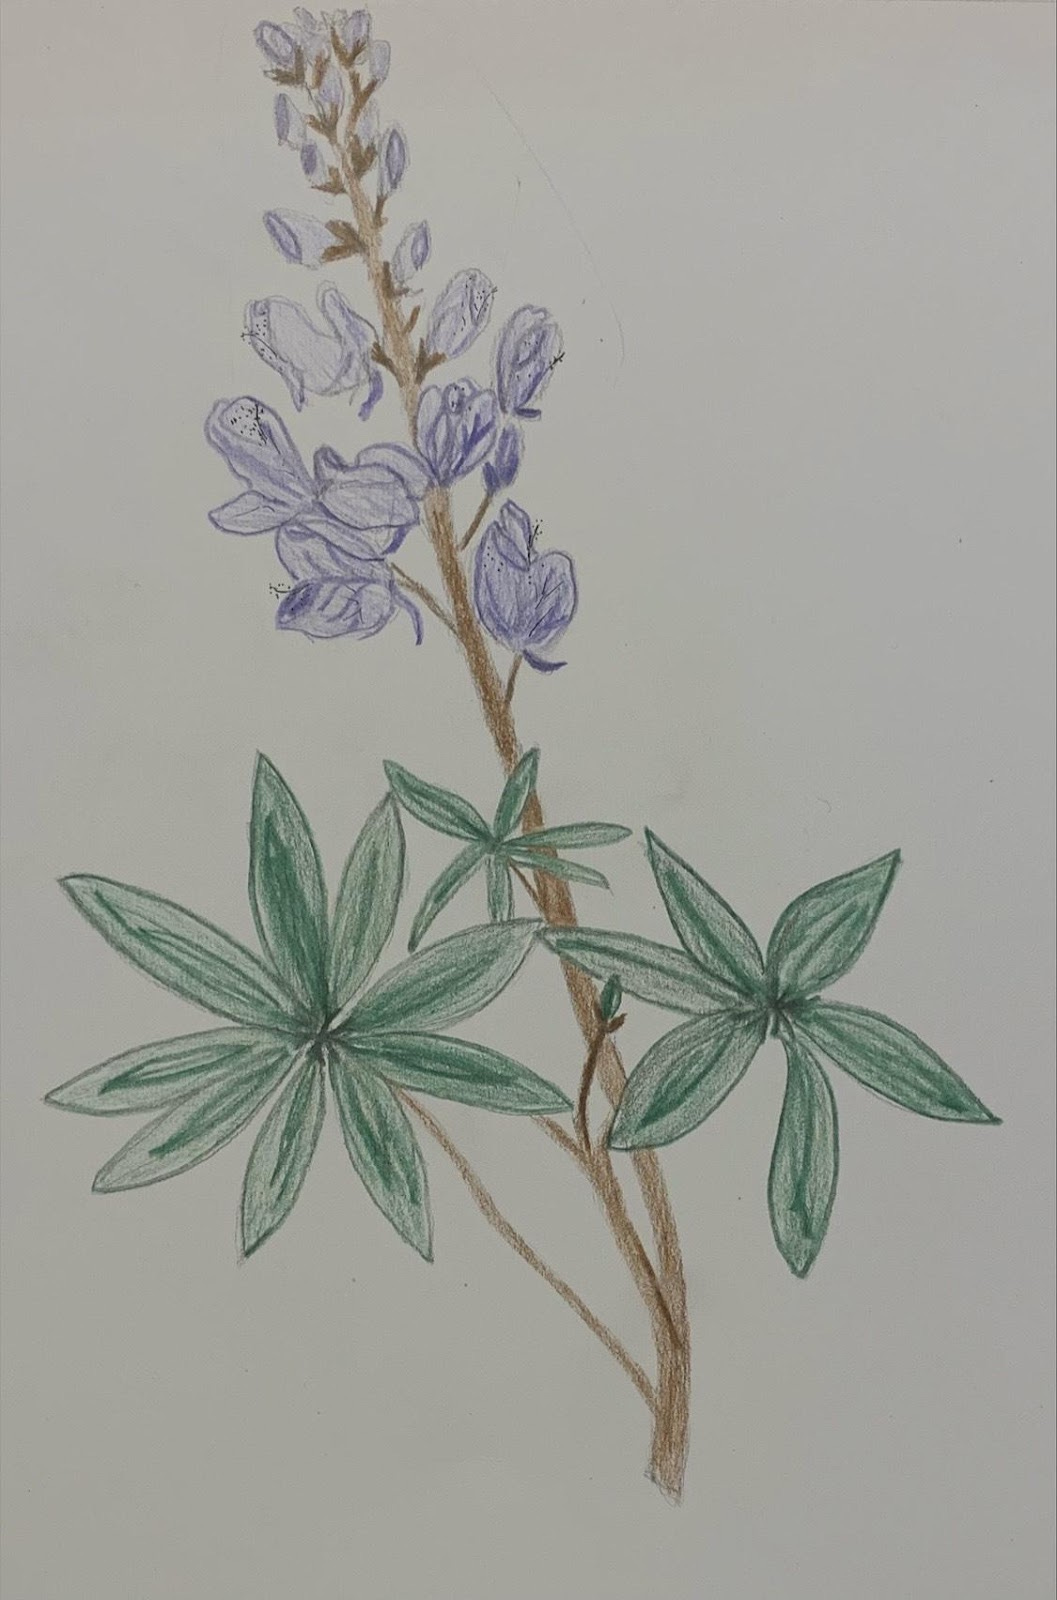 A drawing of a plant

Description automatically generated with medium confidence